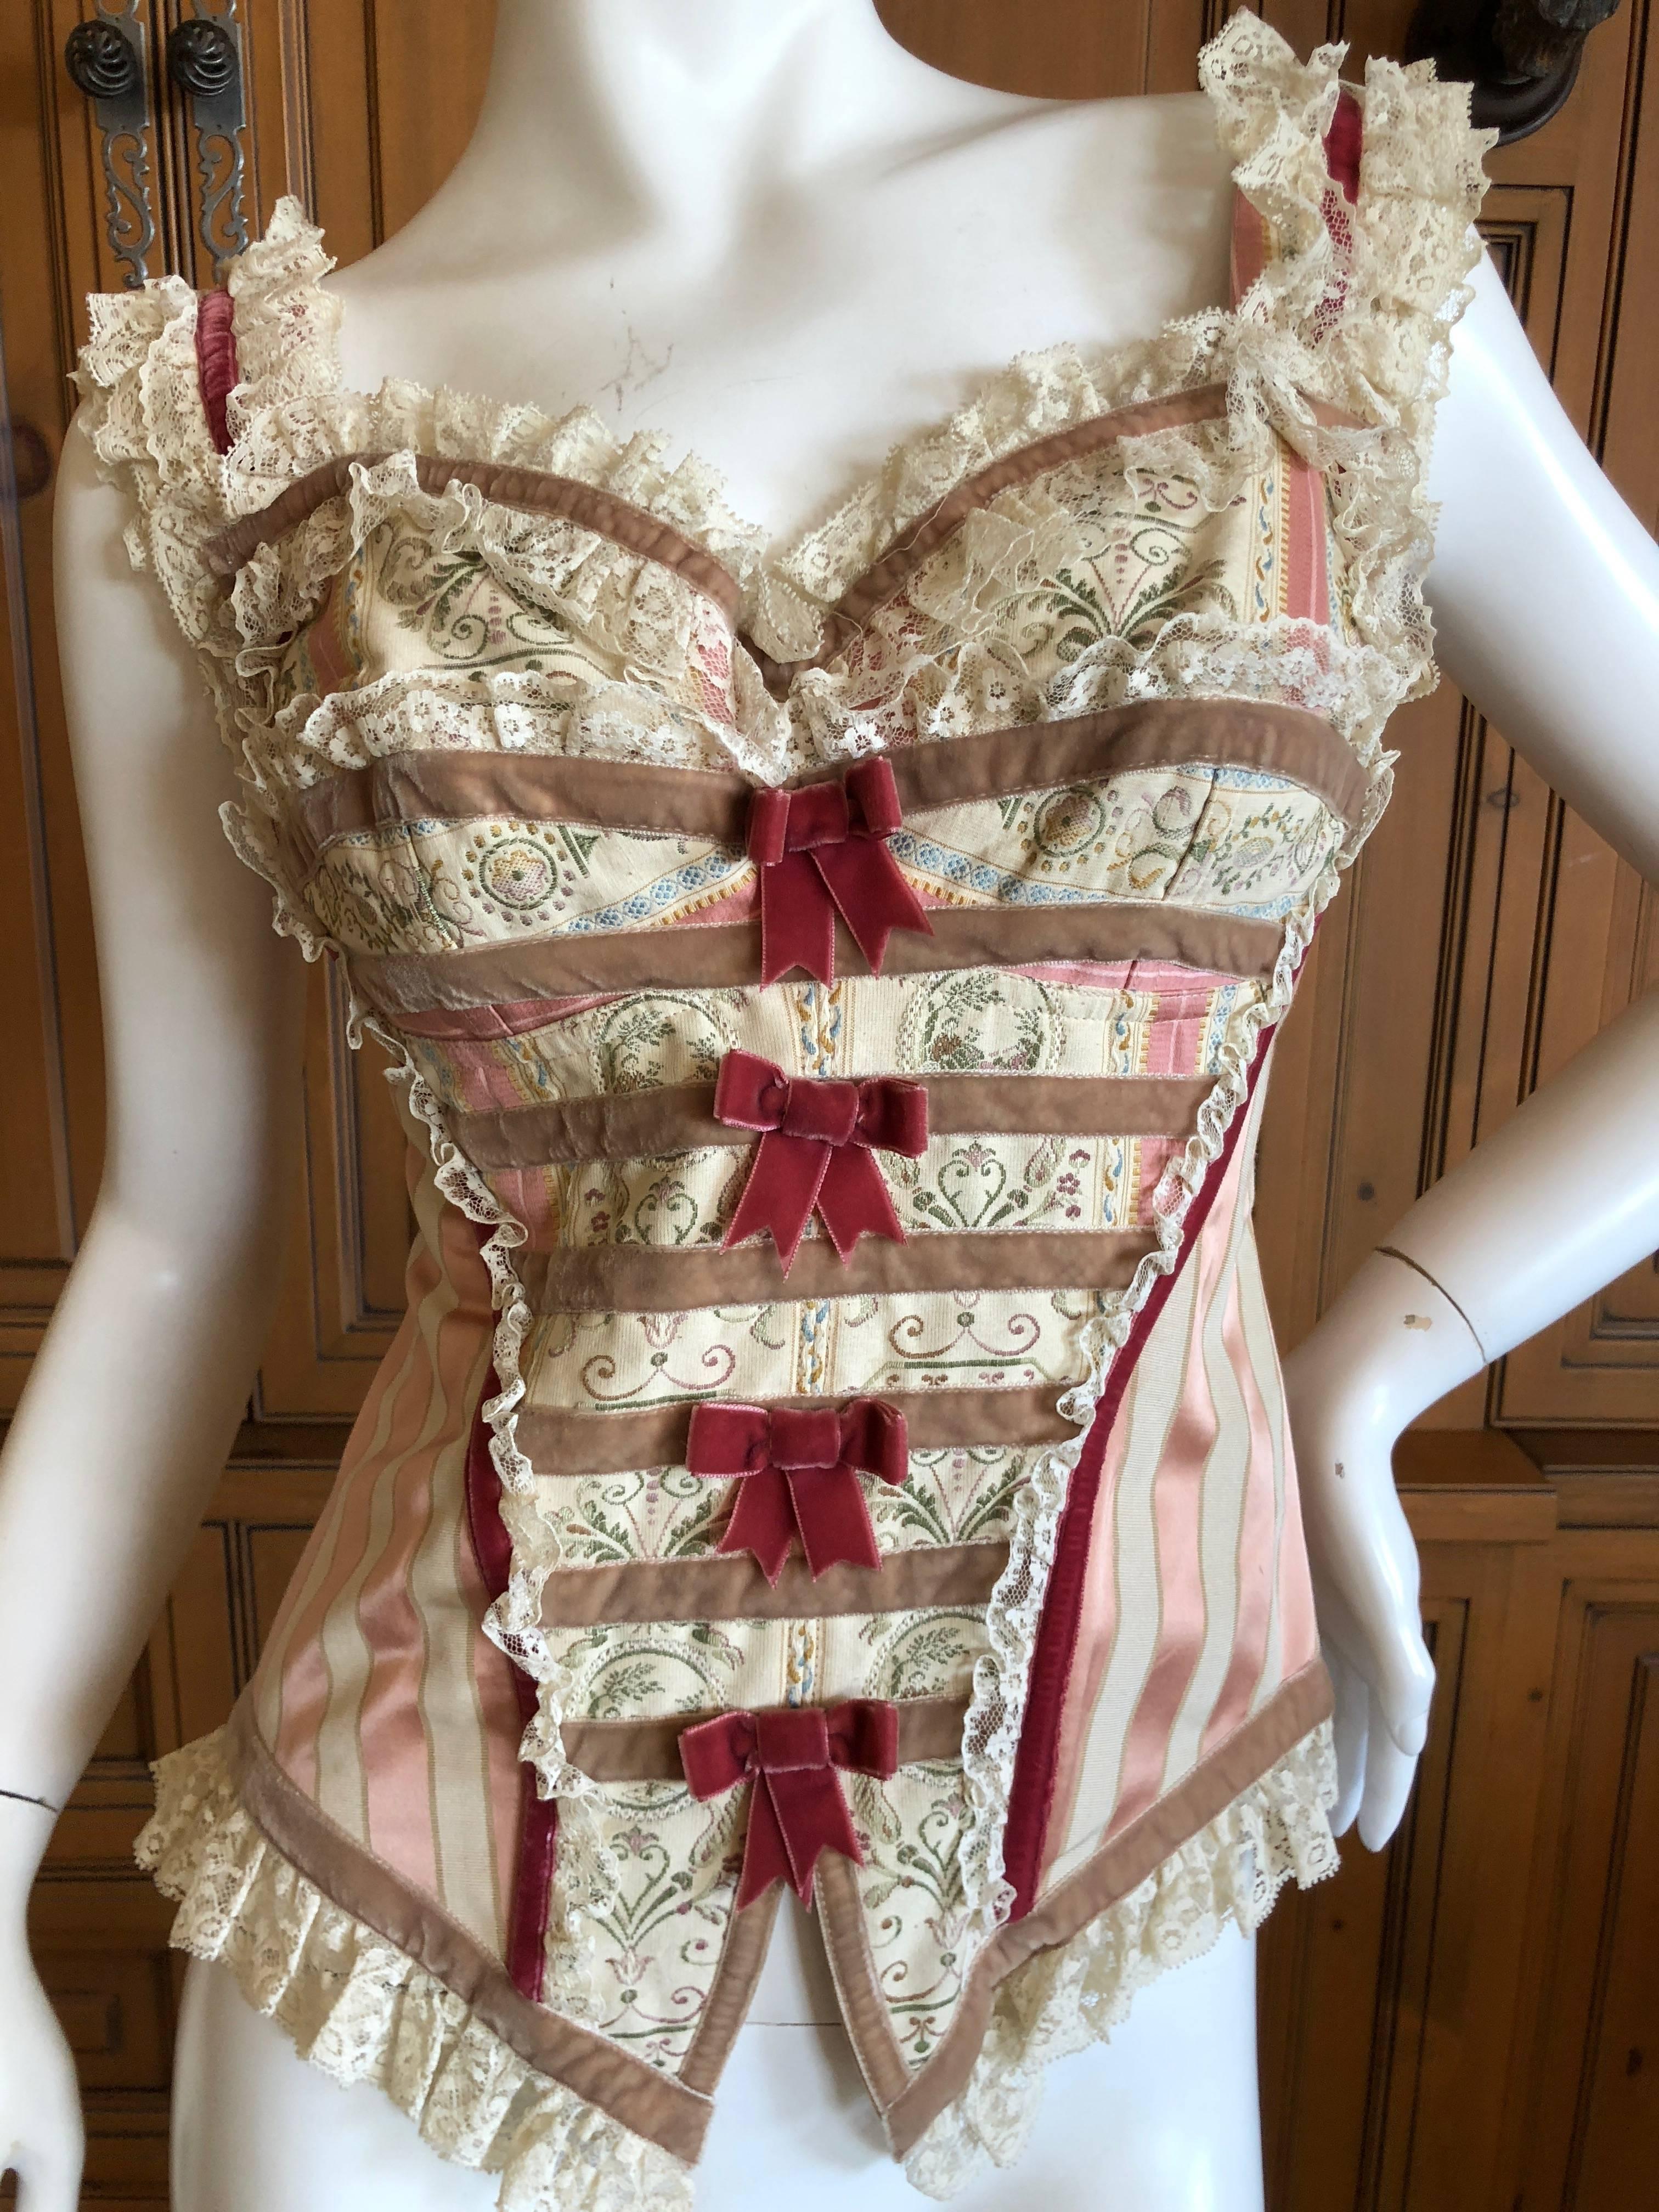 Dolce & Gabbana Romantic 1980's Vintage Corset Bustier Top
This is so pretty, zips up the bac
Size 42
Bust 34